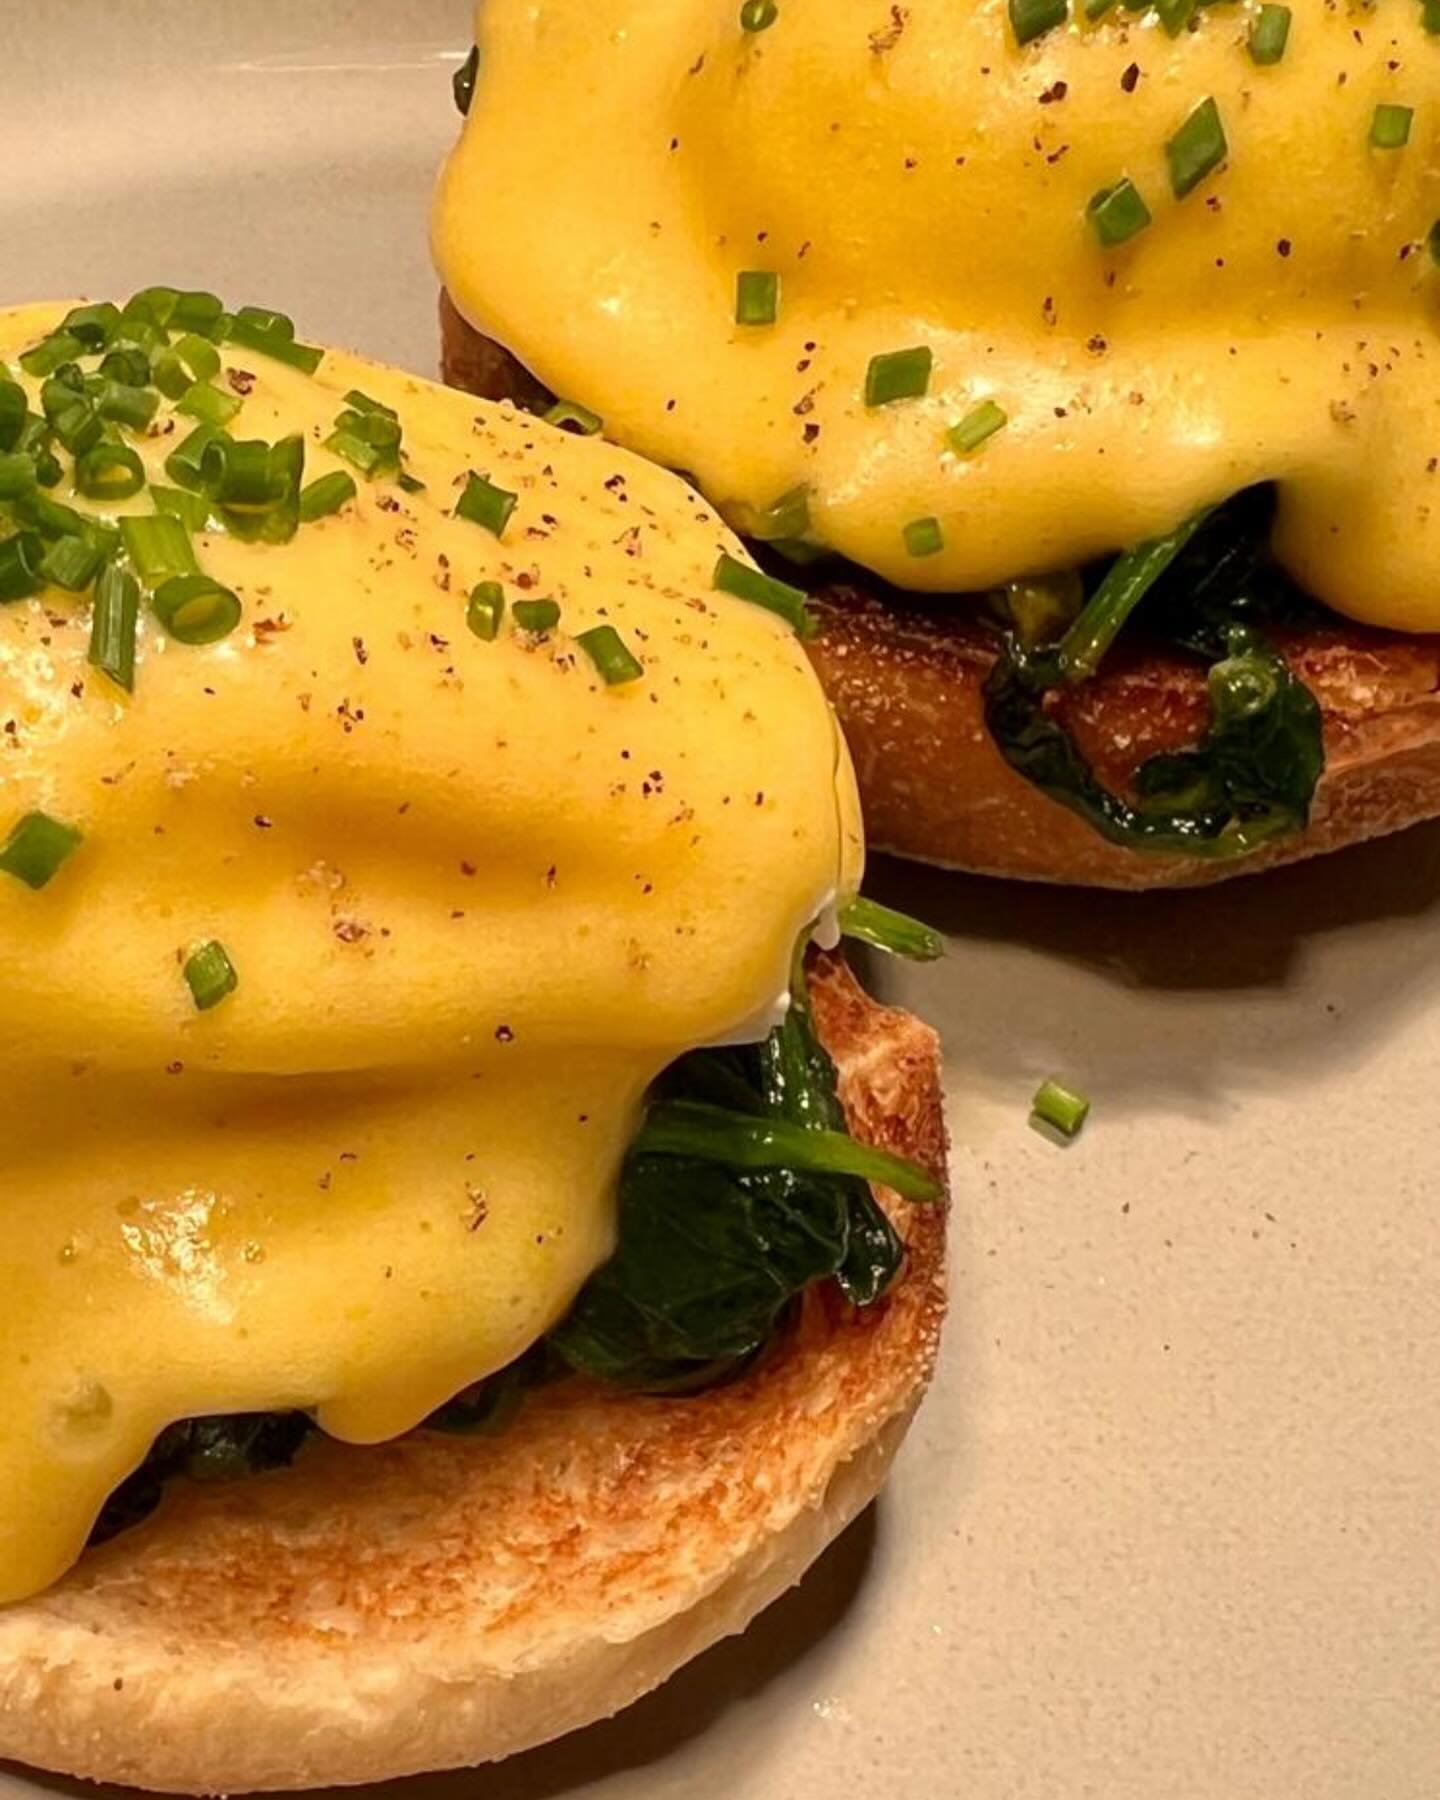 Have you tried our Eggs Florentine? 

English muffin, buttered baby spinach, poached eggs and hollandaise sauce.

It&rsquo;s delicious!